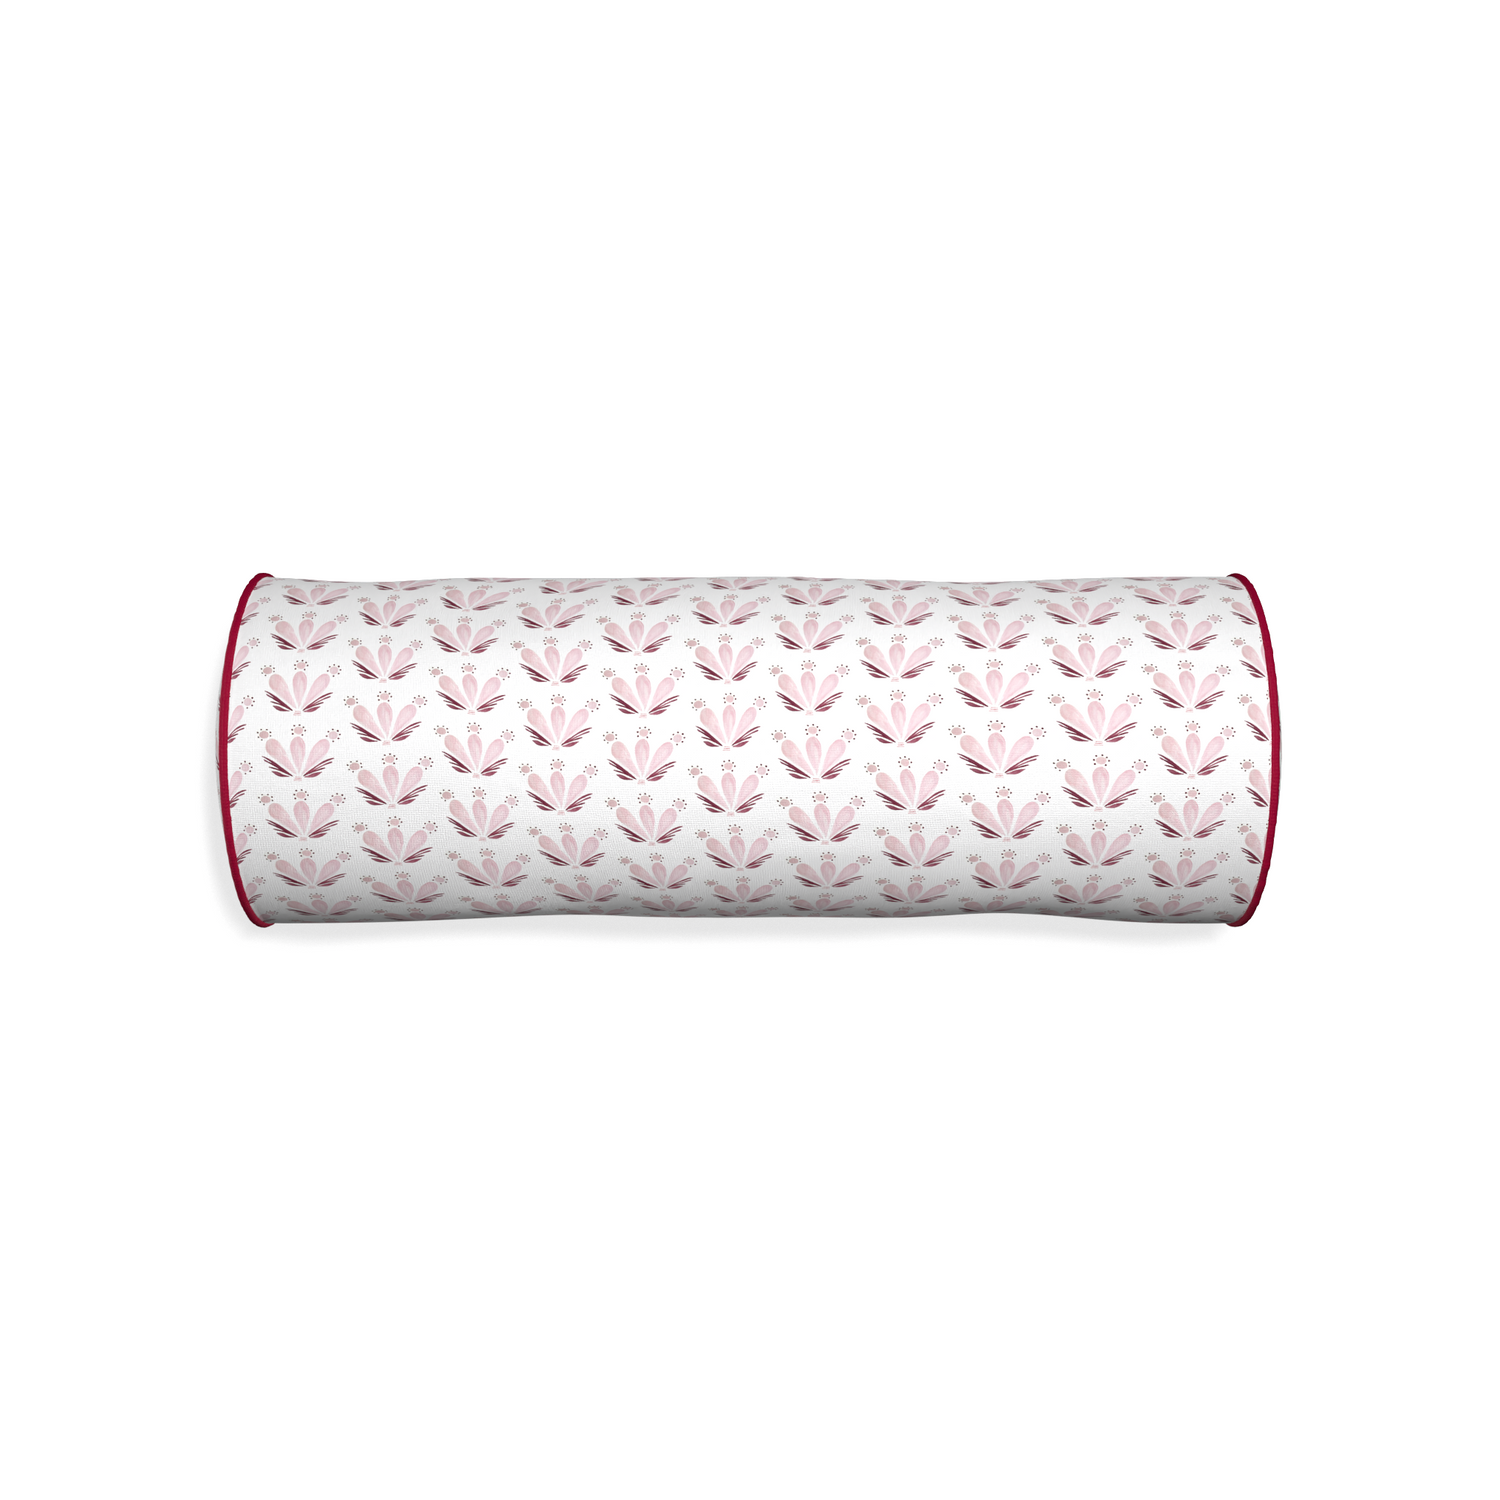 Bolster serena pink custom pillow with raspberry piping on white background